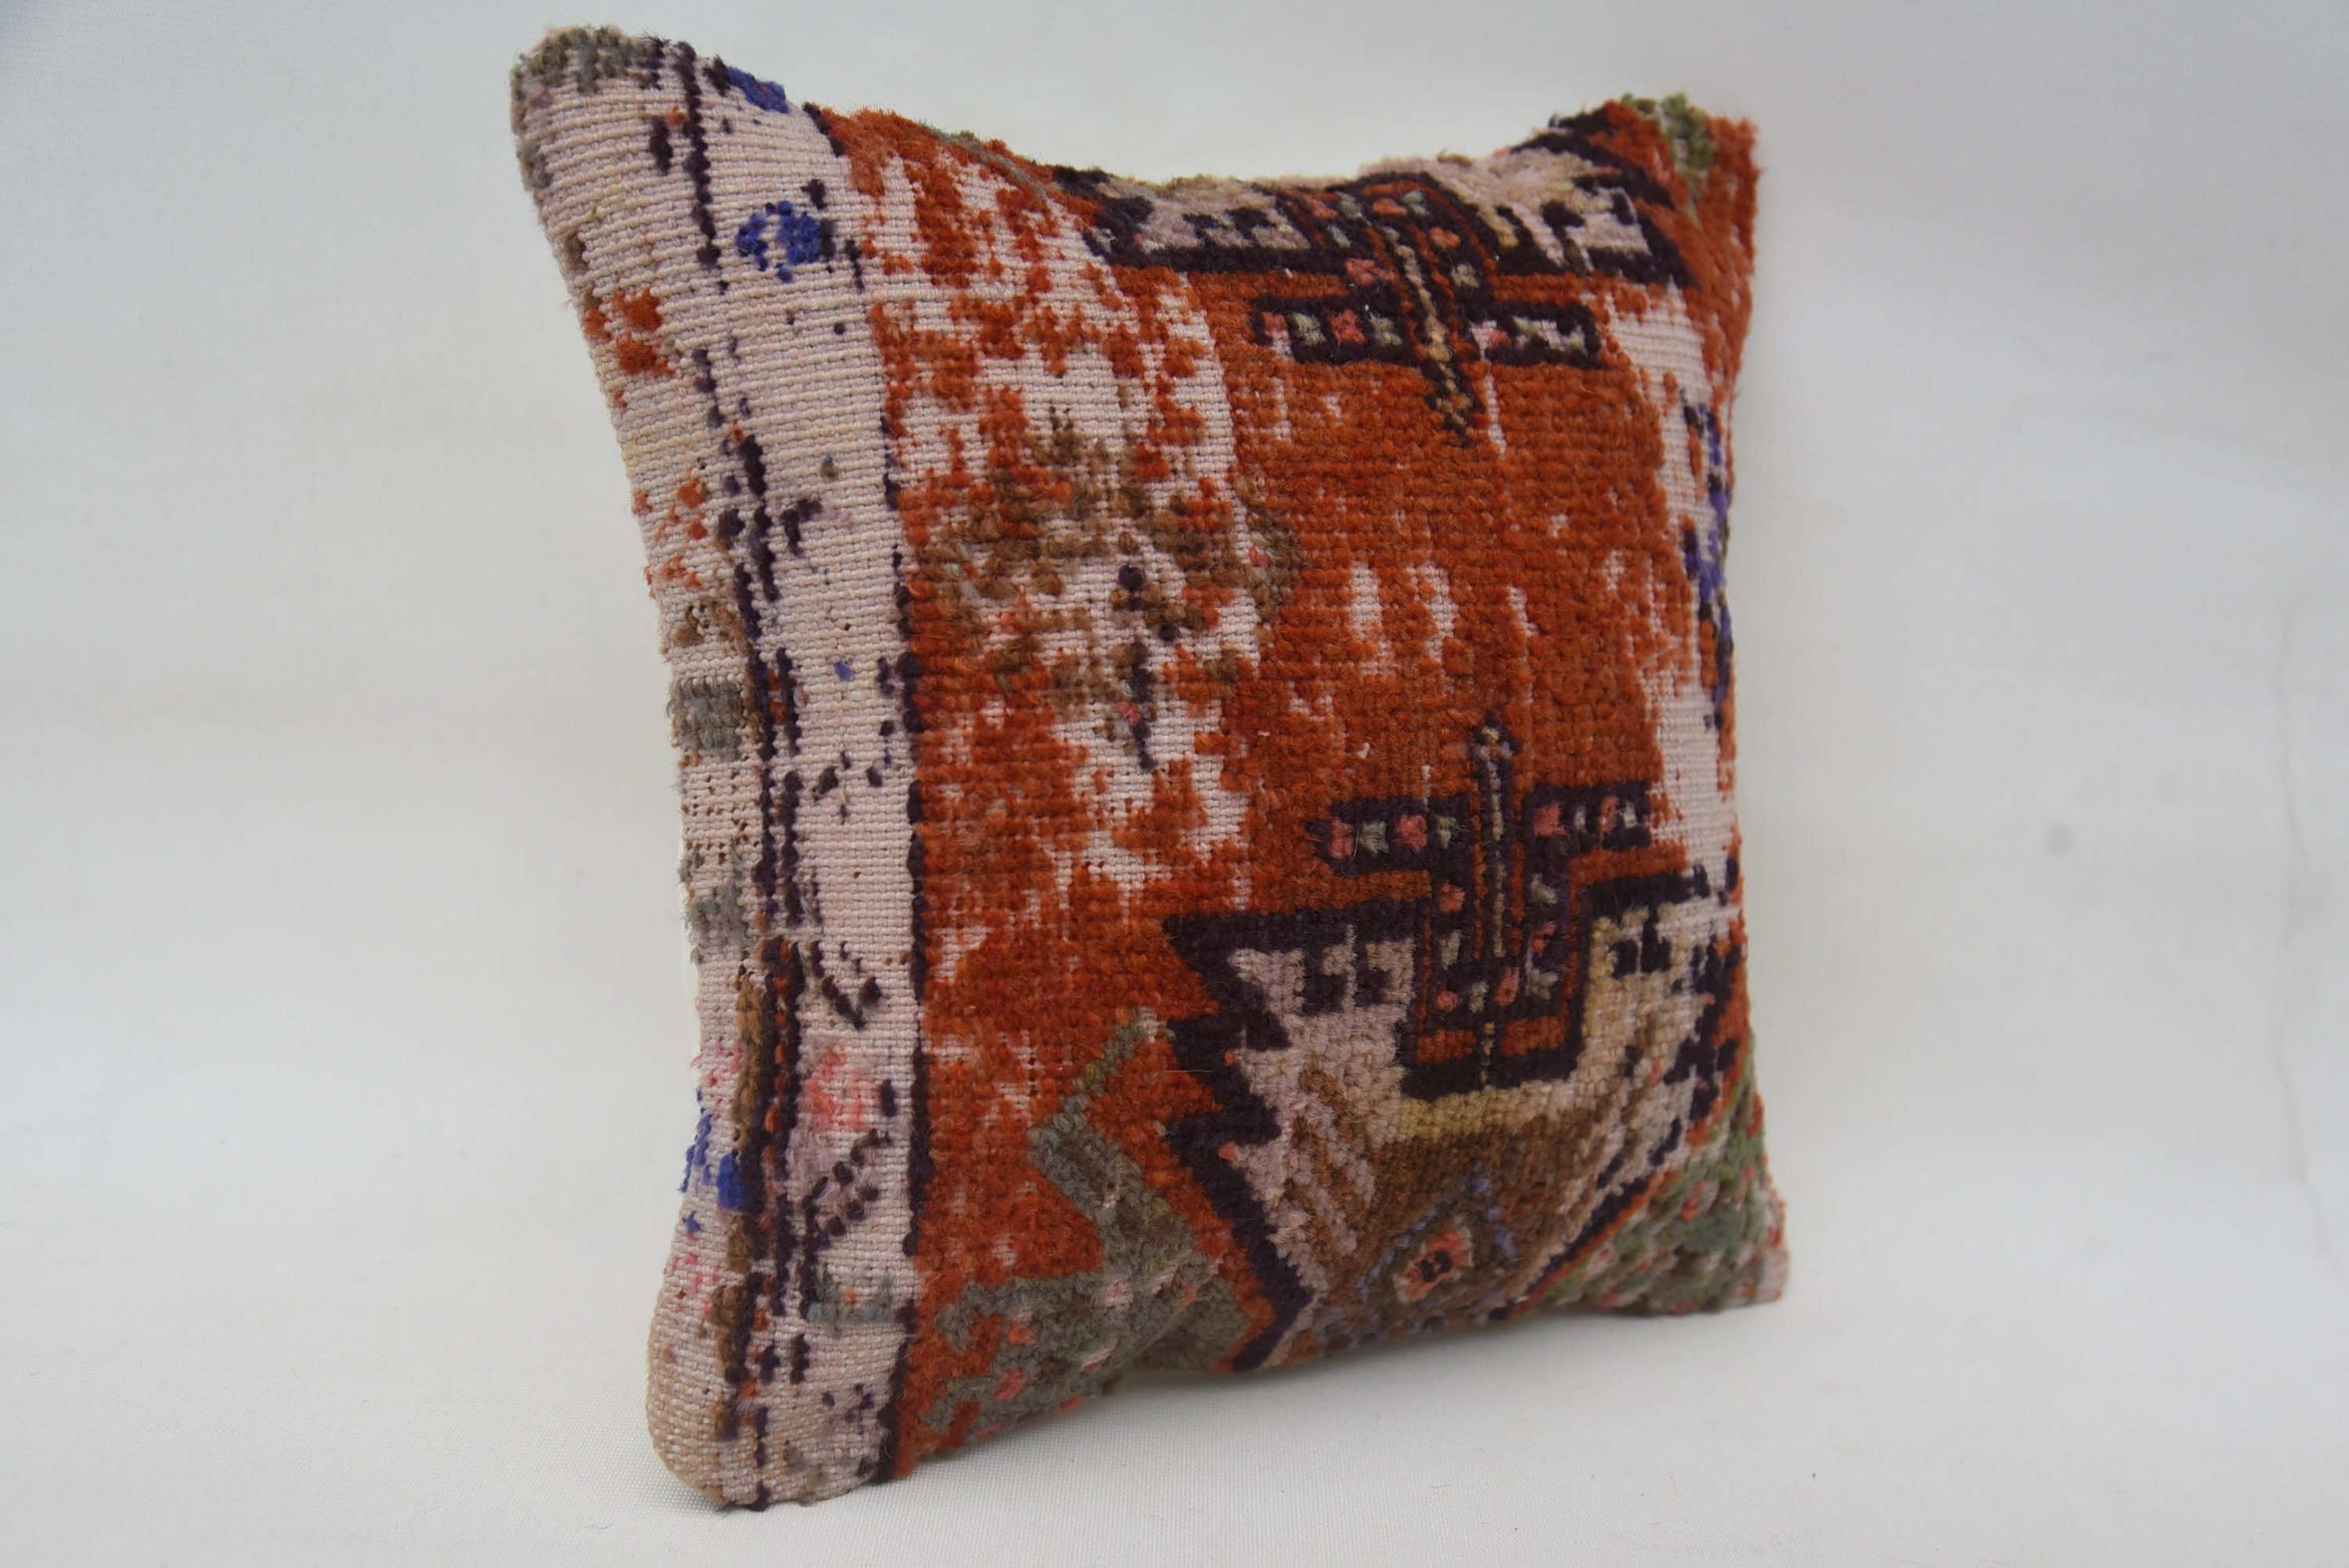 Kilim Pillow Cover, Vintage Pillow, 12"x12" Red Pillow Cover, Accent Cushion Case, Kilim Pillow, Muted Cushion Cover, Ikat Cushion Cover